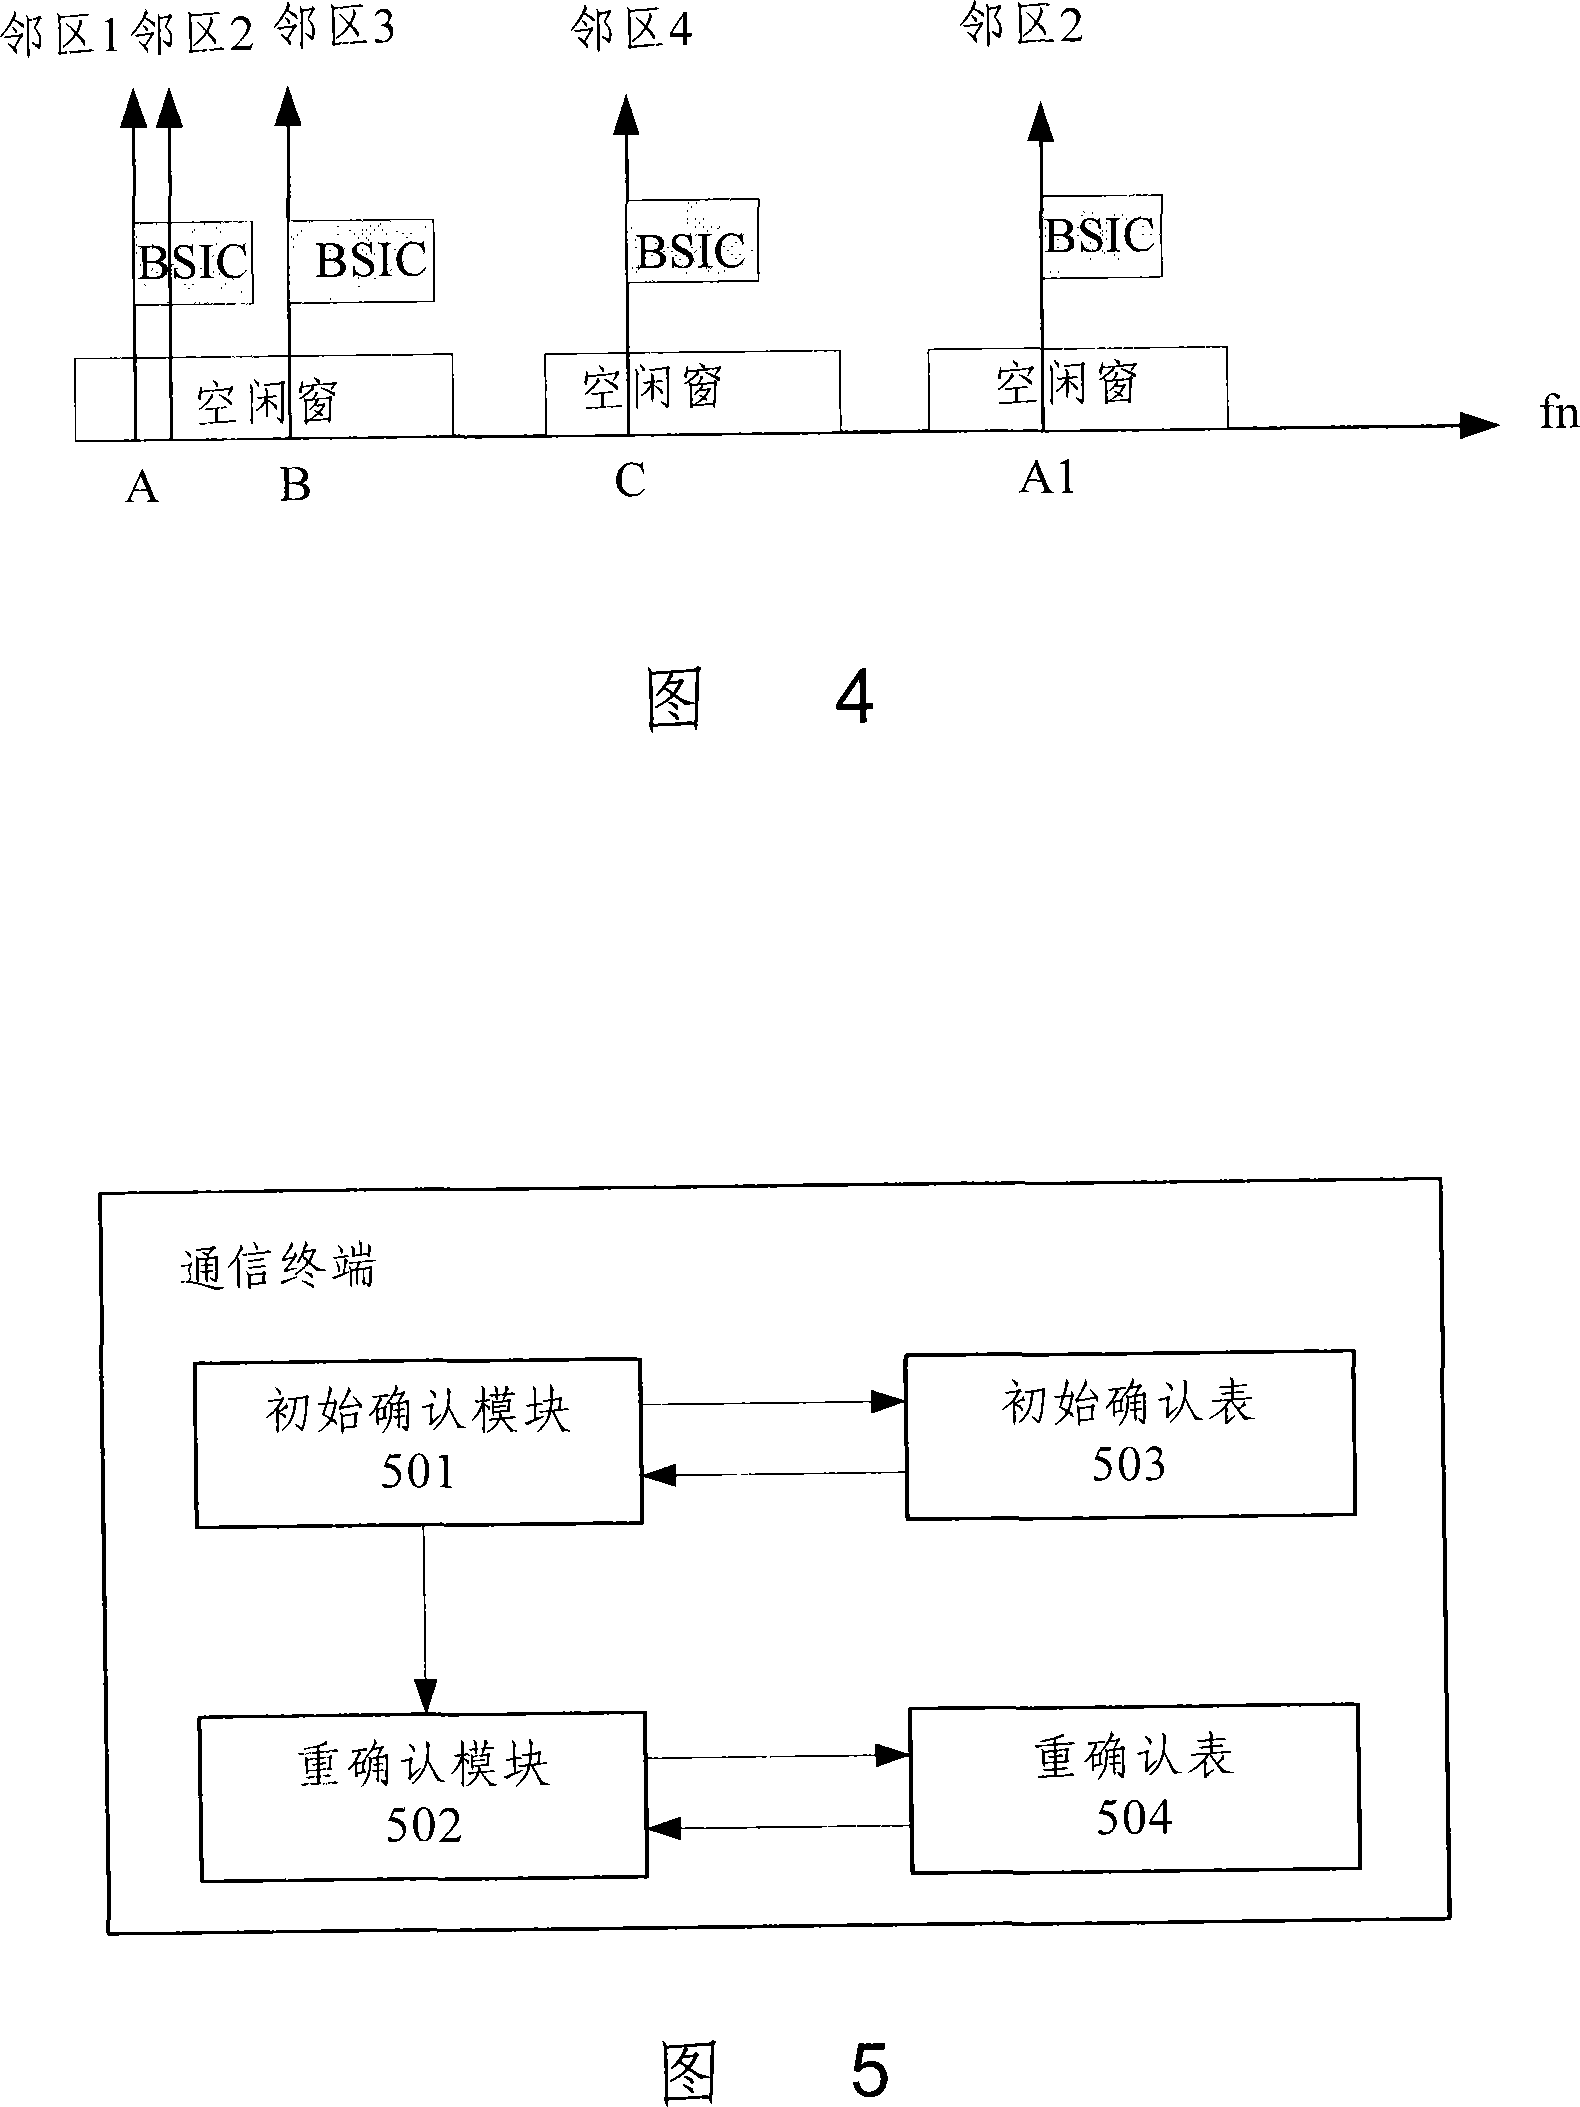 Method and apparatus for confirming base station district identification code of communications terminal